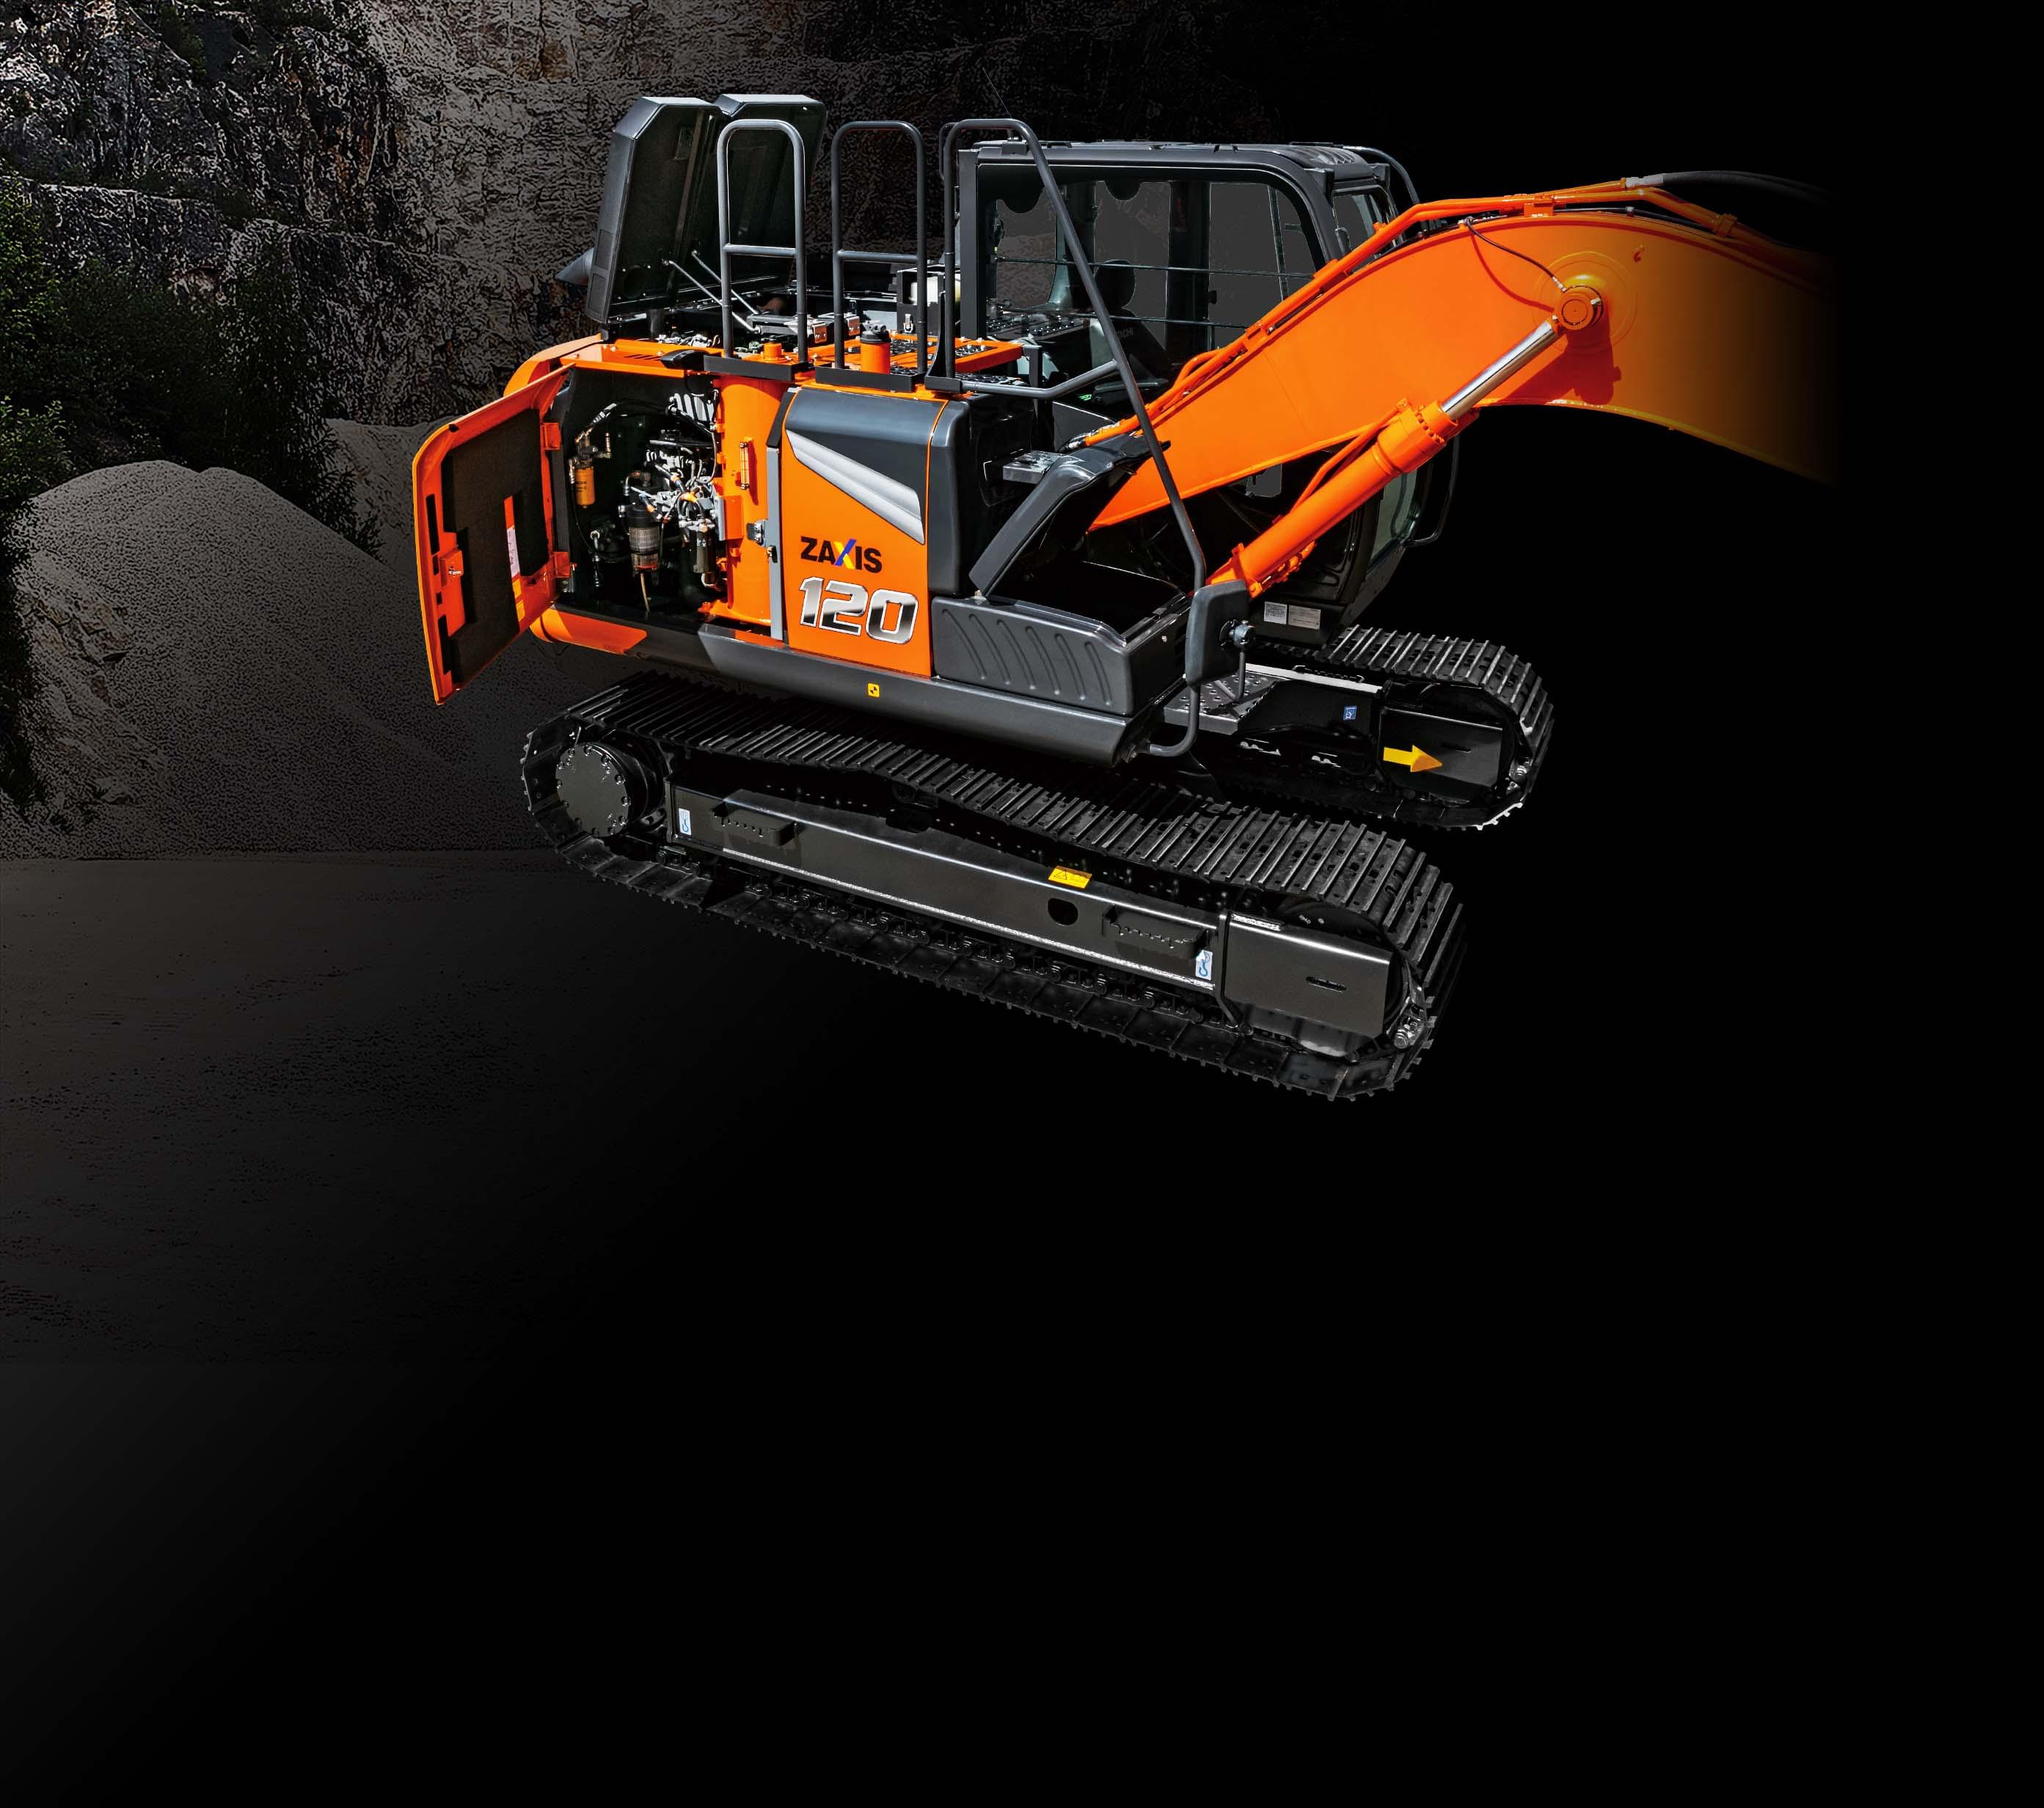 ZAXIS120 / ZAXIS135US / ZAXIS135USOS｜ZAXIS 7 SERIES 新型ZAXIS-7 